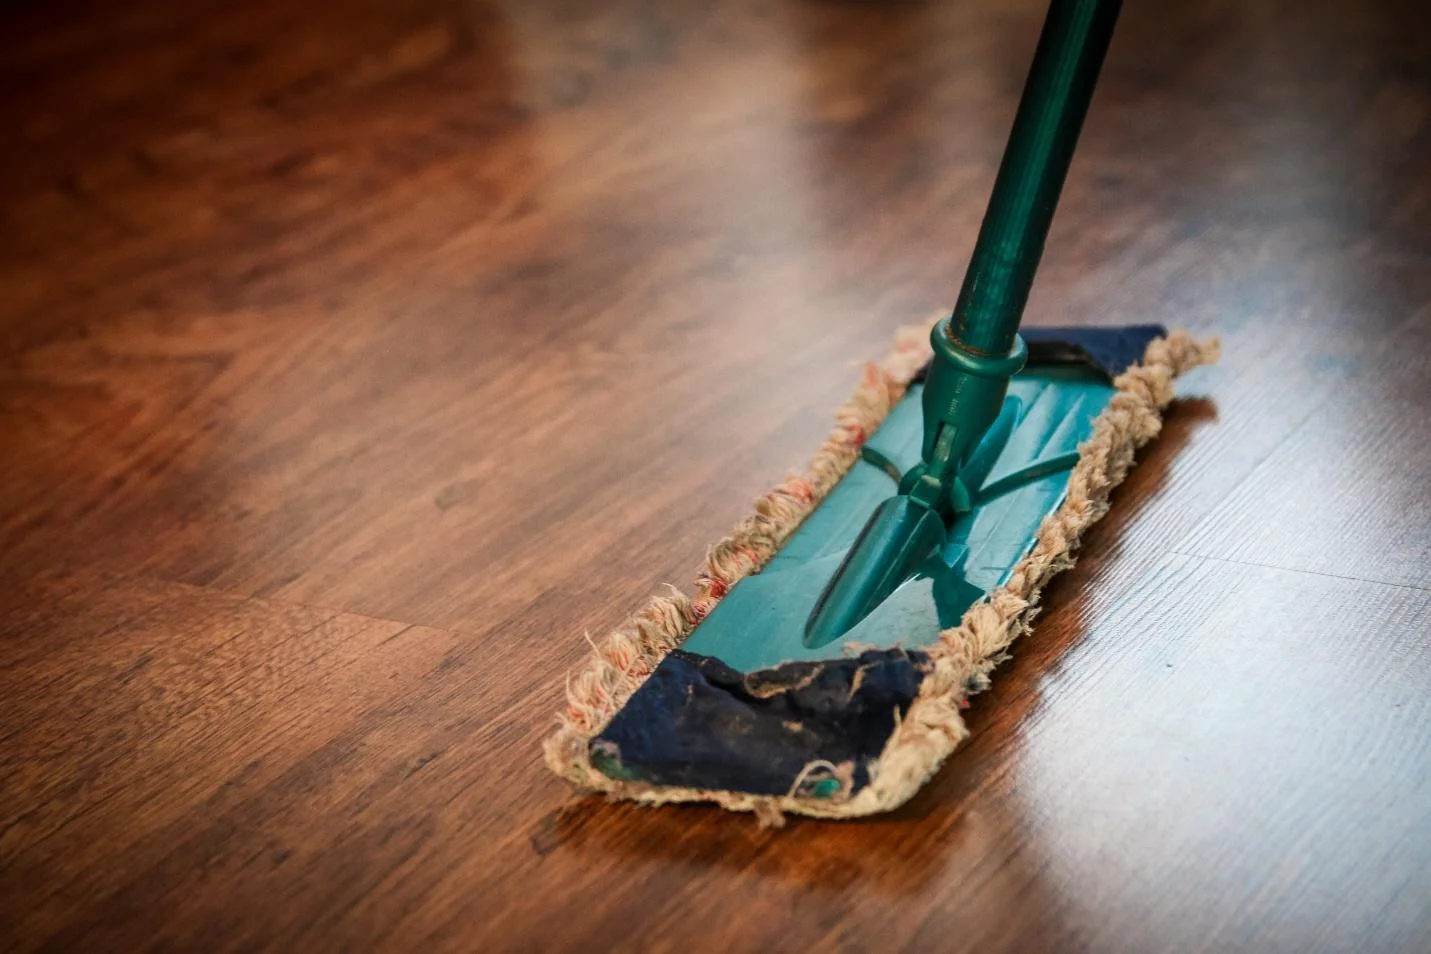 <a href='https://greatertennessee.com/flooring/flooring-101/how-to-clean-hardwood-floors/' title='How To Clean Hardwood Floors'>How To Clean Hardwood Floors</a>